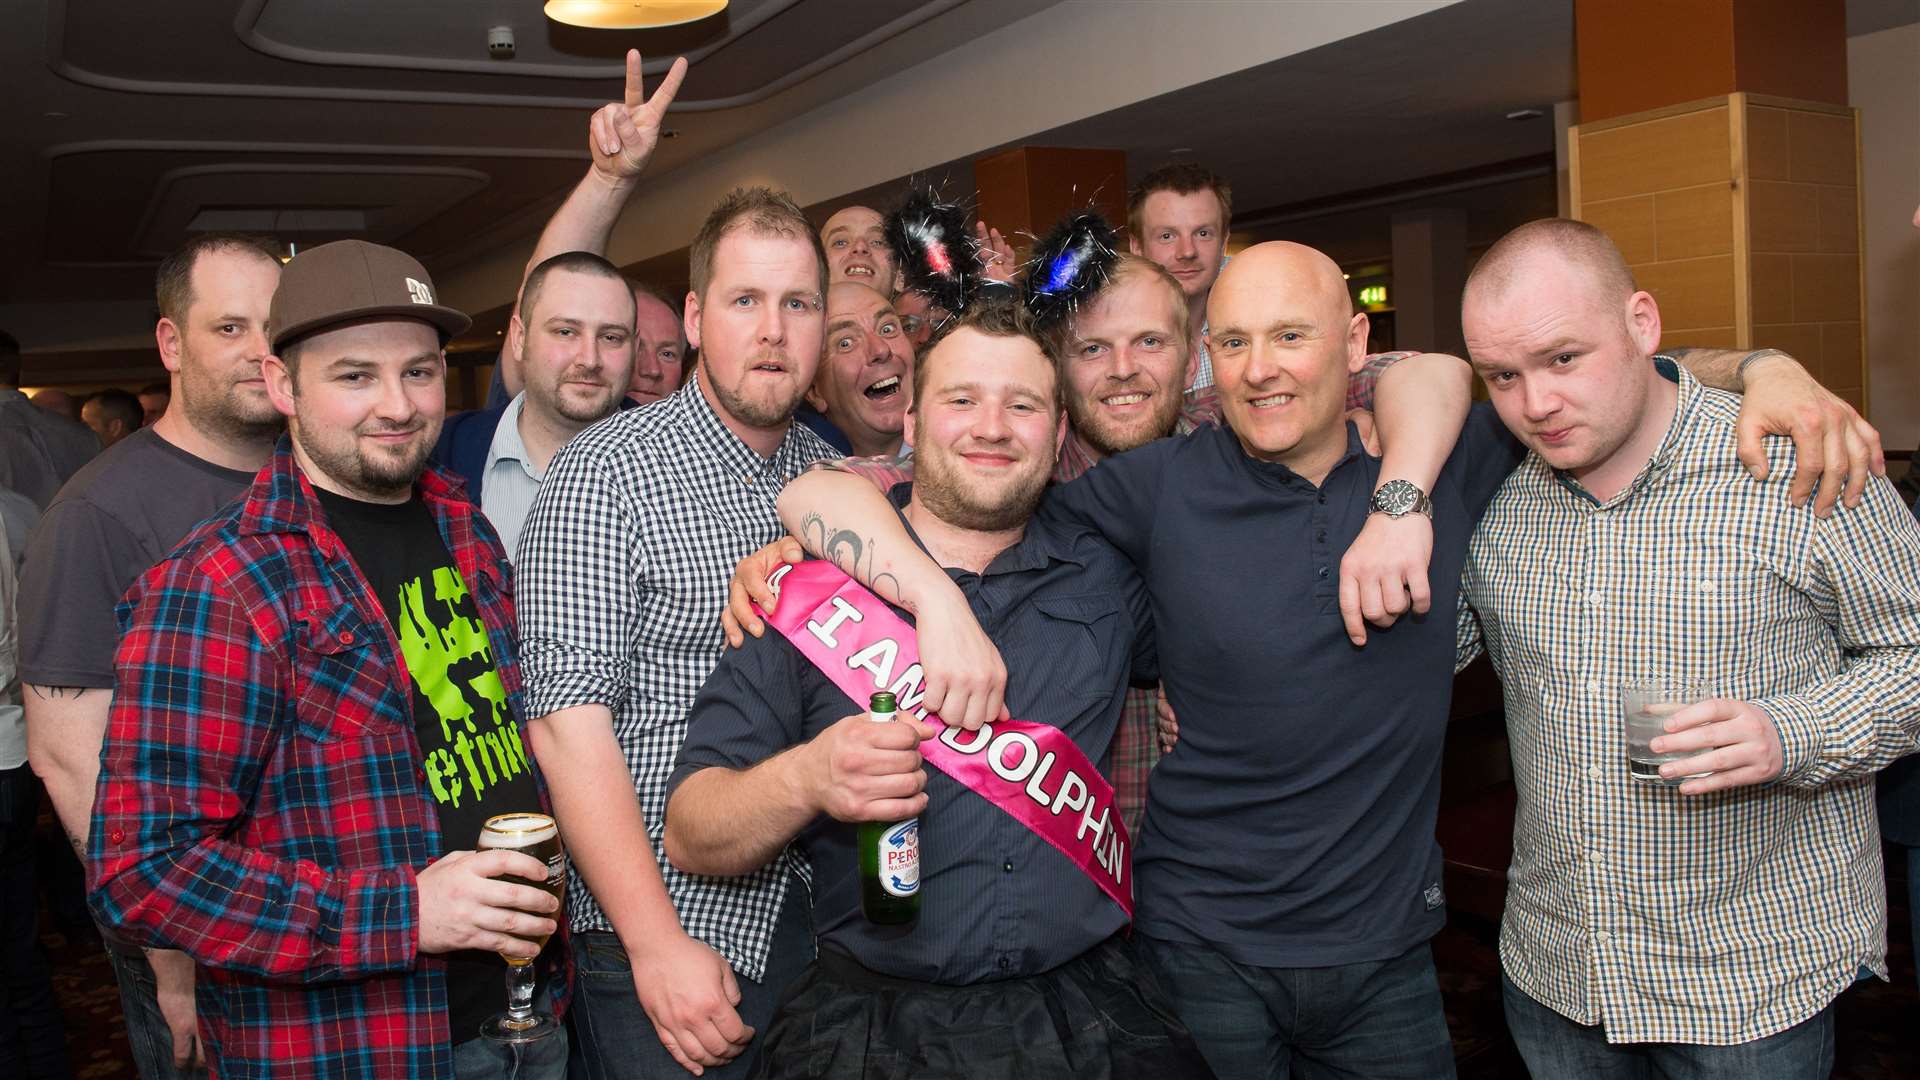 Andrew MacIver (sash) on his stag night in Wetherspoons.